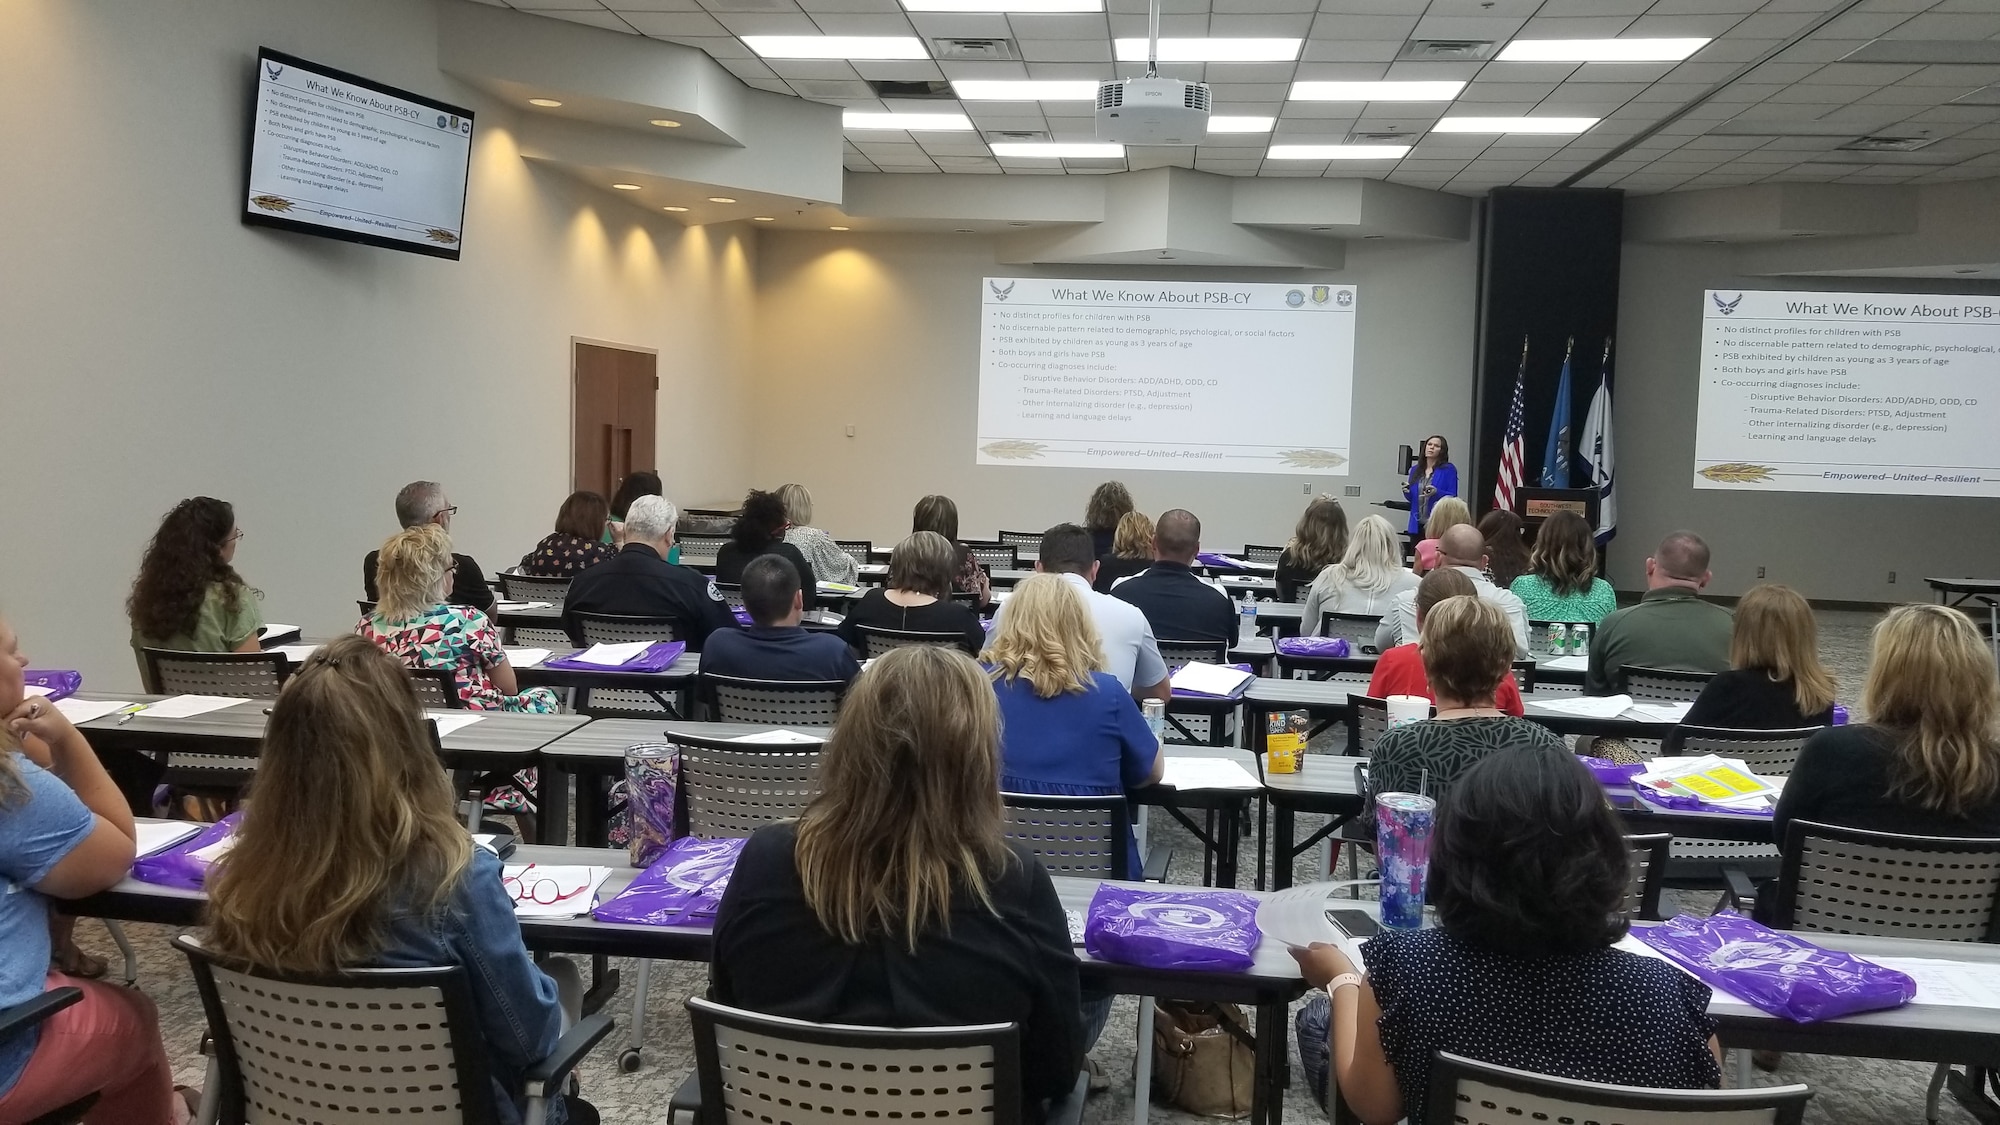 Educators from across three school districts listen to a training on Problematic Sexual Behavior at Southwest Technology Center in Altus, Oklahoma, July 26, 2021. Problematic sexual behavior in children and youth is defined as behavior, initiated by children younger than 18, that involves using sexual or private body parts in a manner that is developmentally inappropriate or potentially harmful to the individual or individuals impacted by the behavior. (Courtesy photo by Judy Mott)